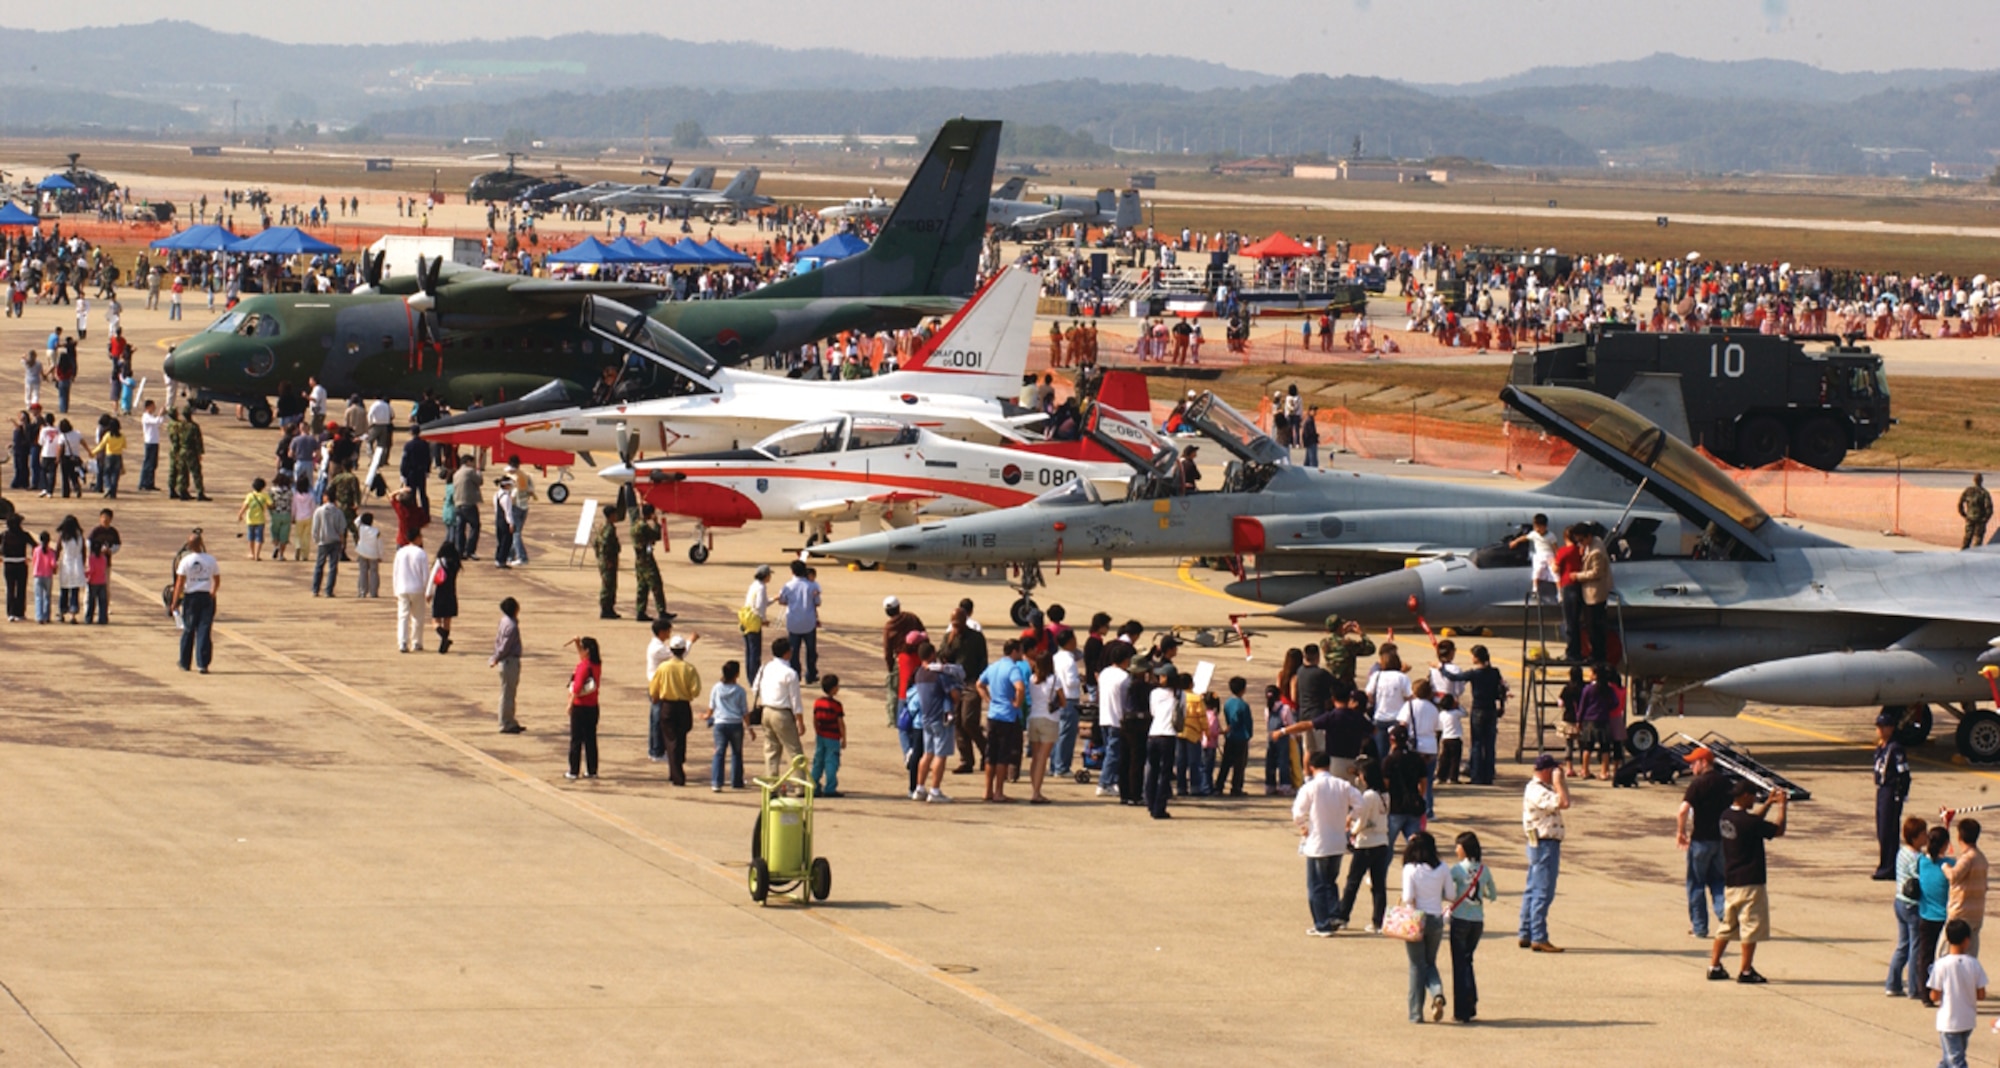 OSAN AIR BASE, Republic of Korea --  People who attended Osan’s 2006 Air Power Day were able to see more than 30 military assets on static display. (U.S. Air Force photo by Airman Jason Epley)